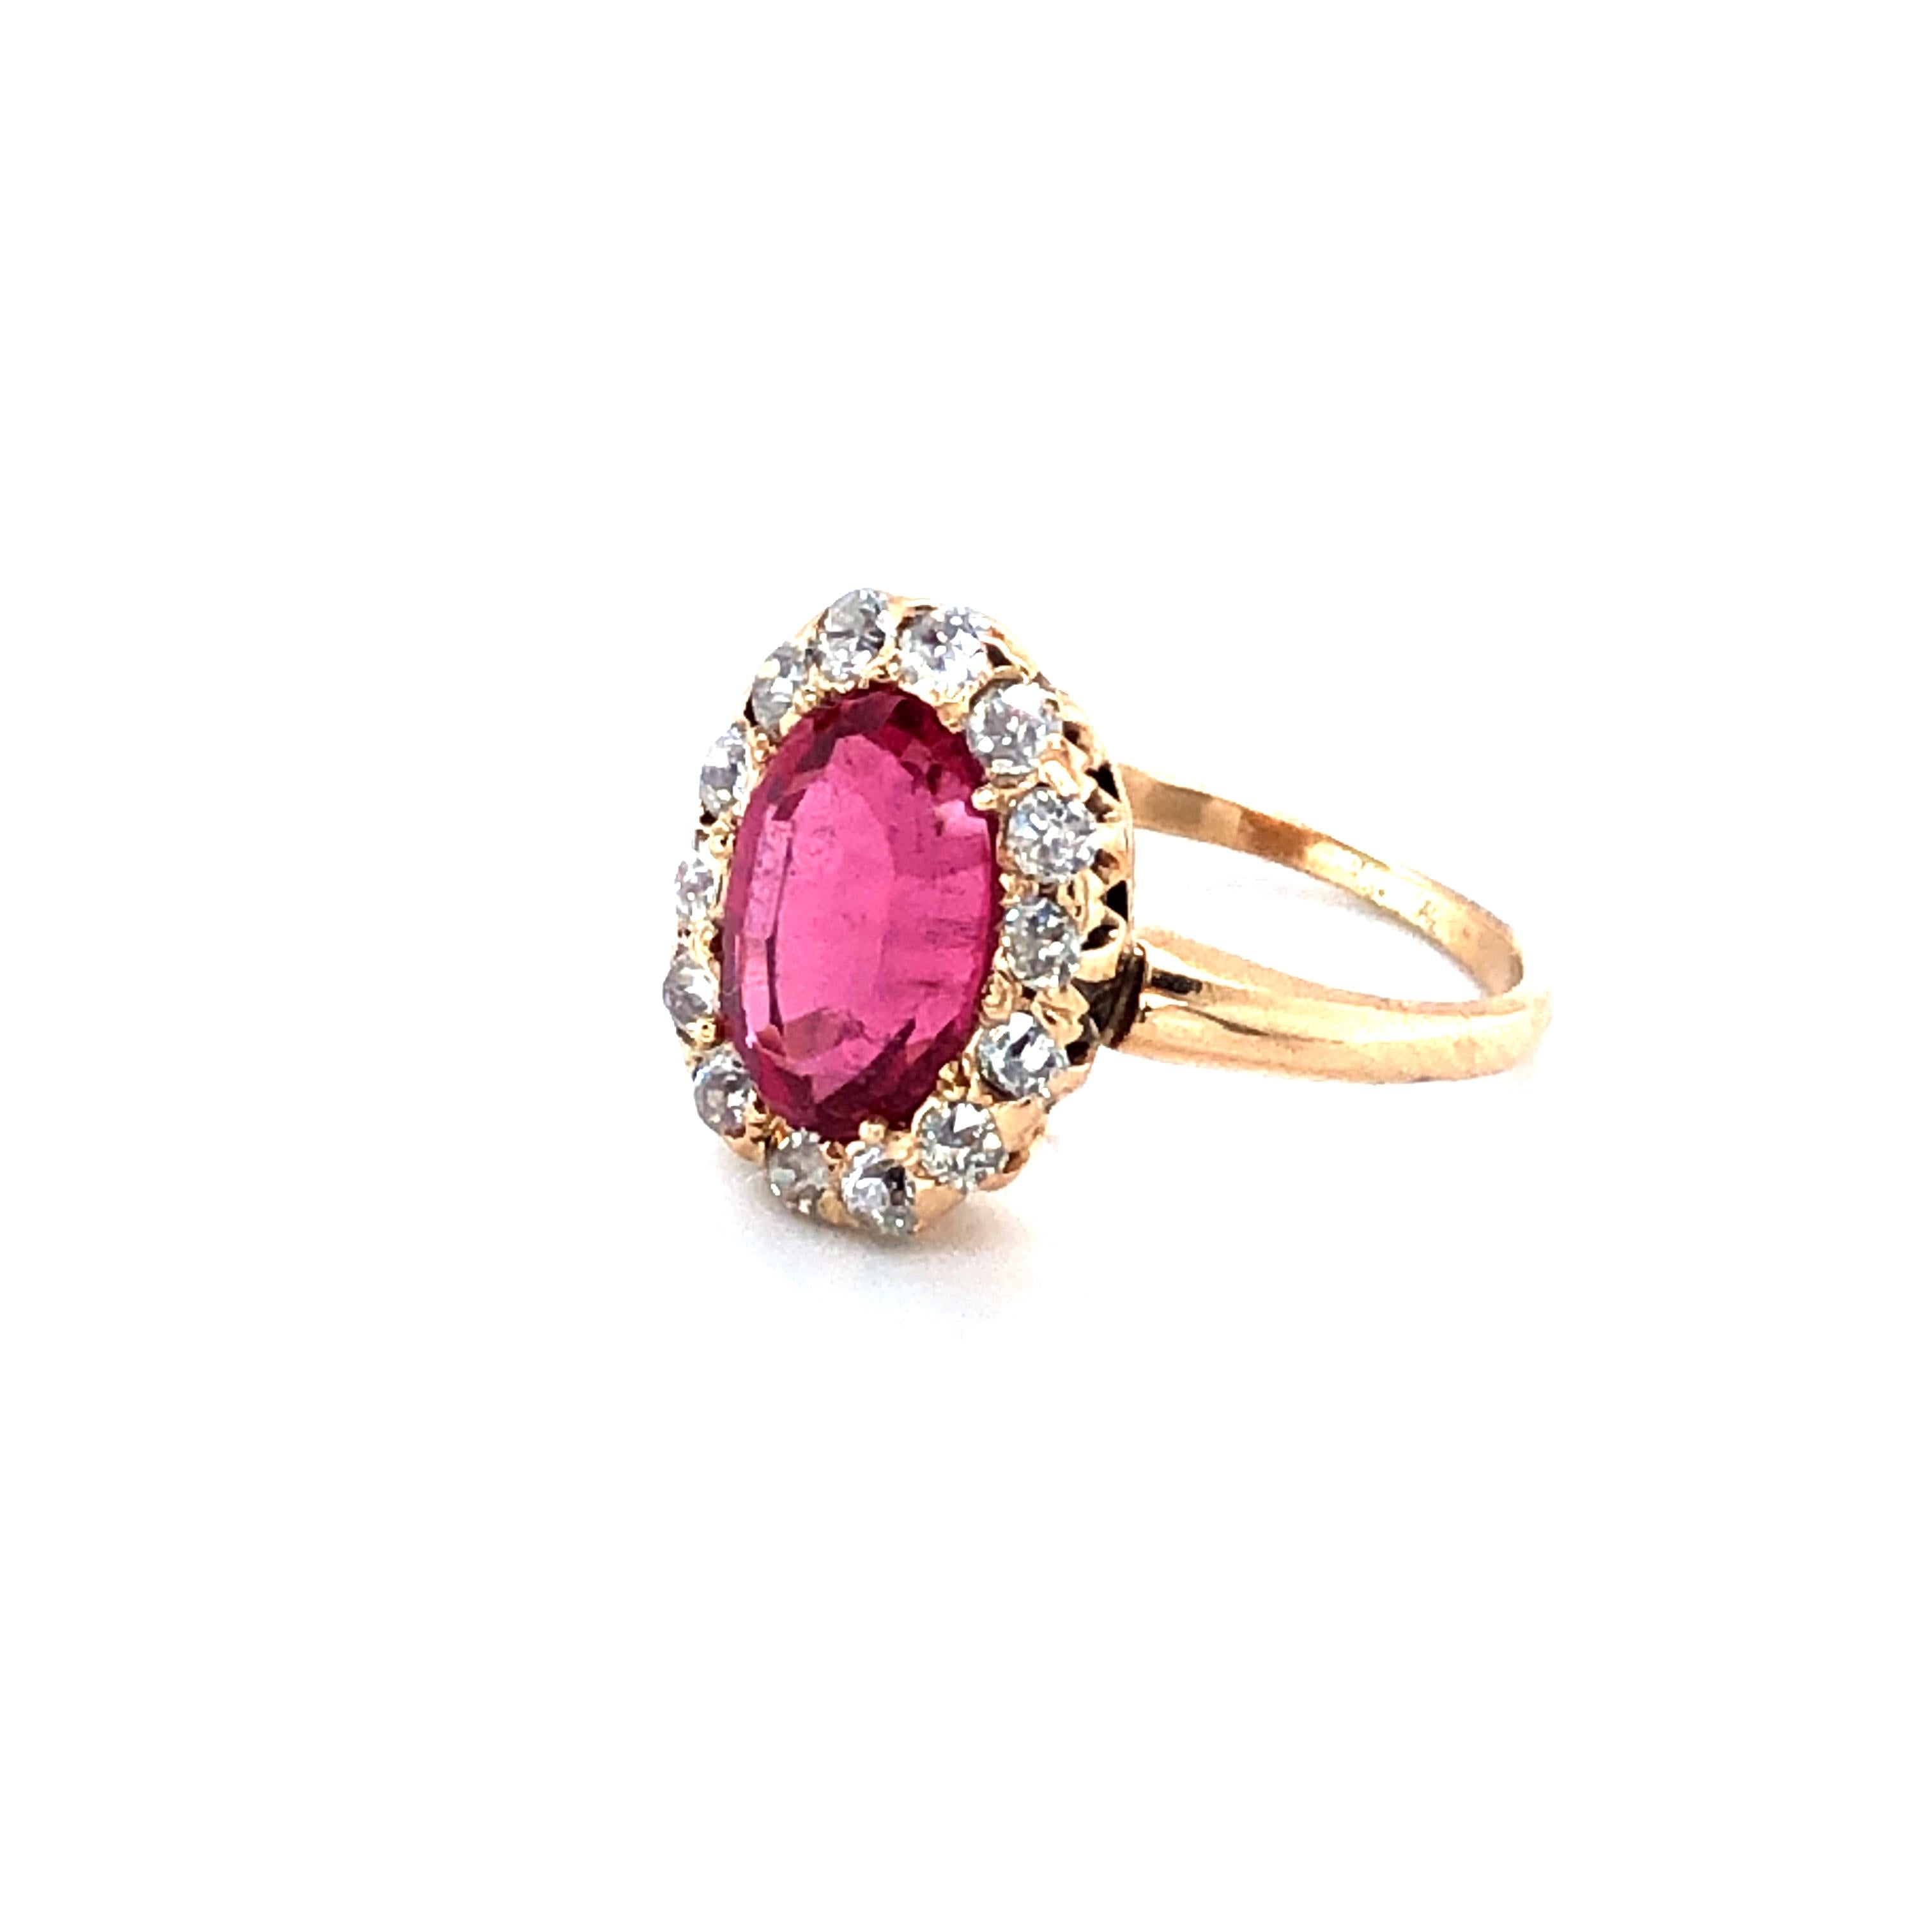 Women's Antique 2 Carat Ruby and 0.65 Carat Old European Diamond Ring, circa Early 1900